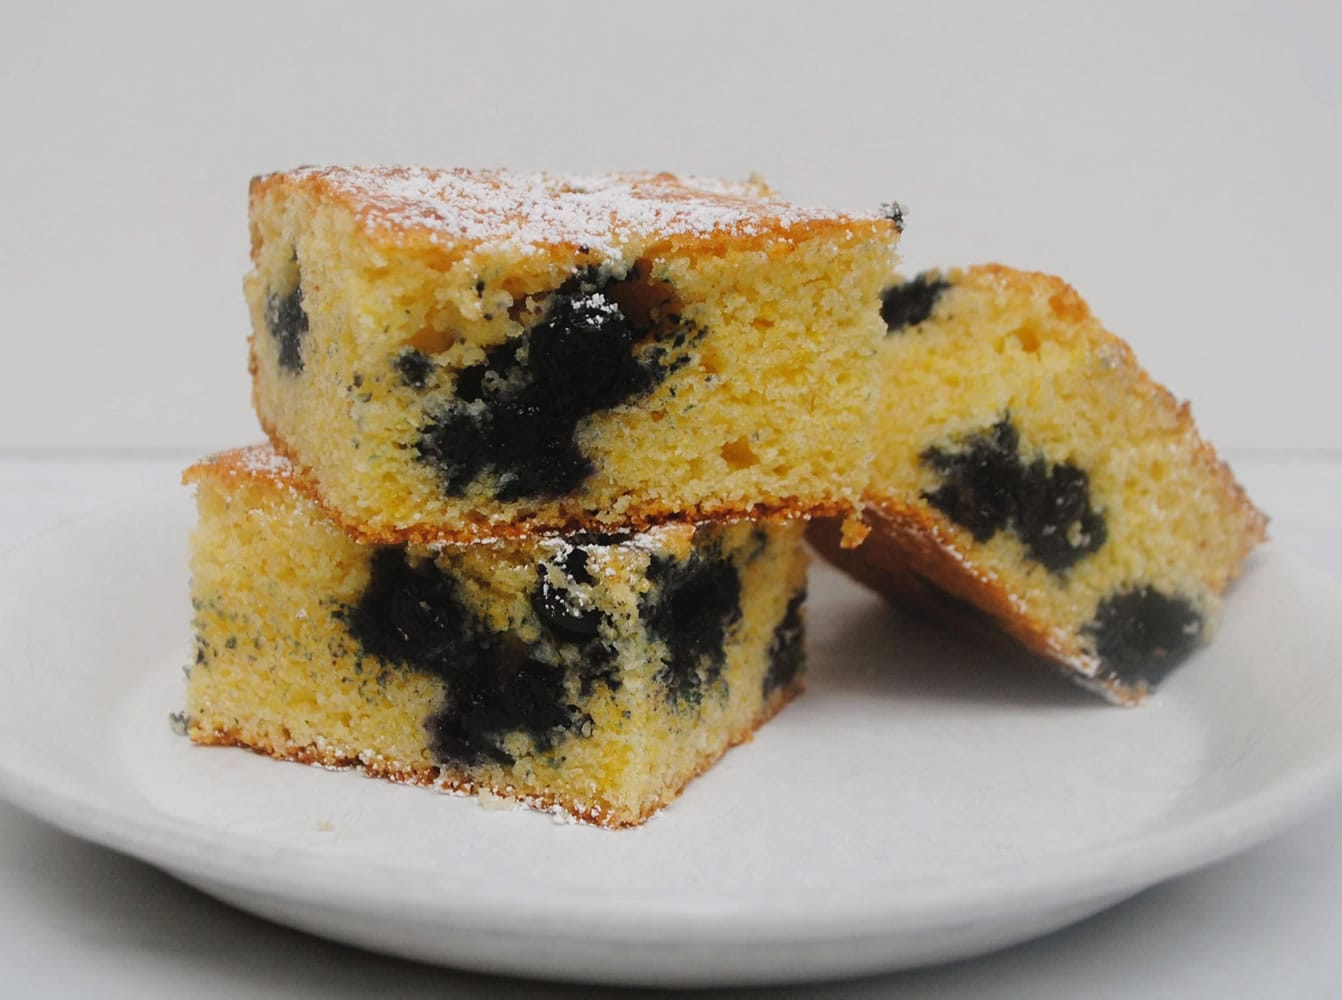 Ricotta cheese adds moisture and rich flavor to this One-bowl Blueberry-Ricotta Cake.